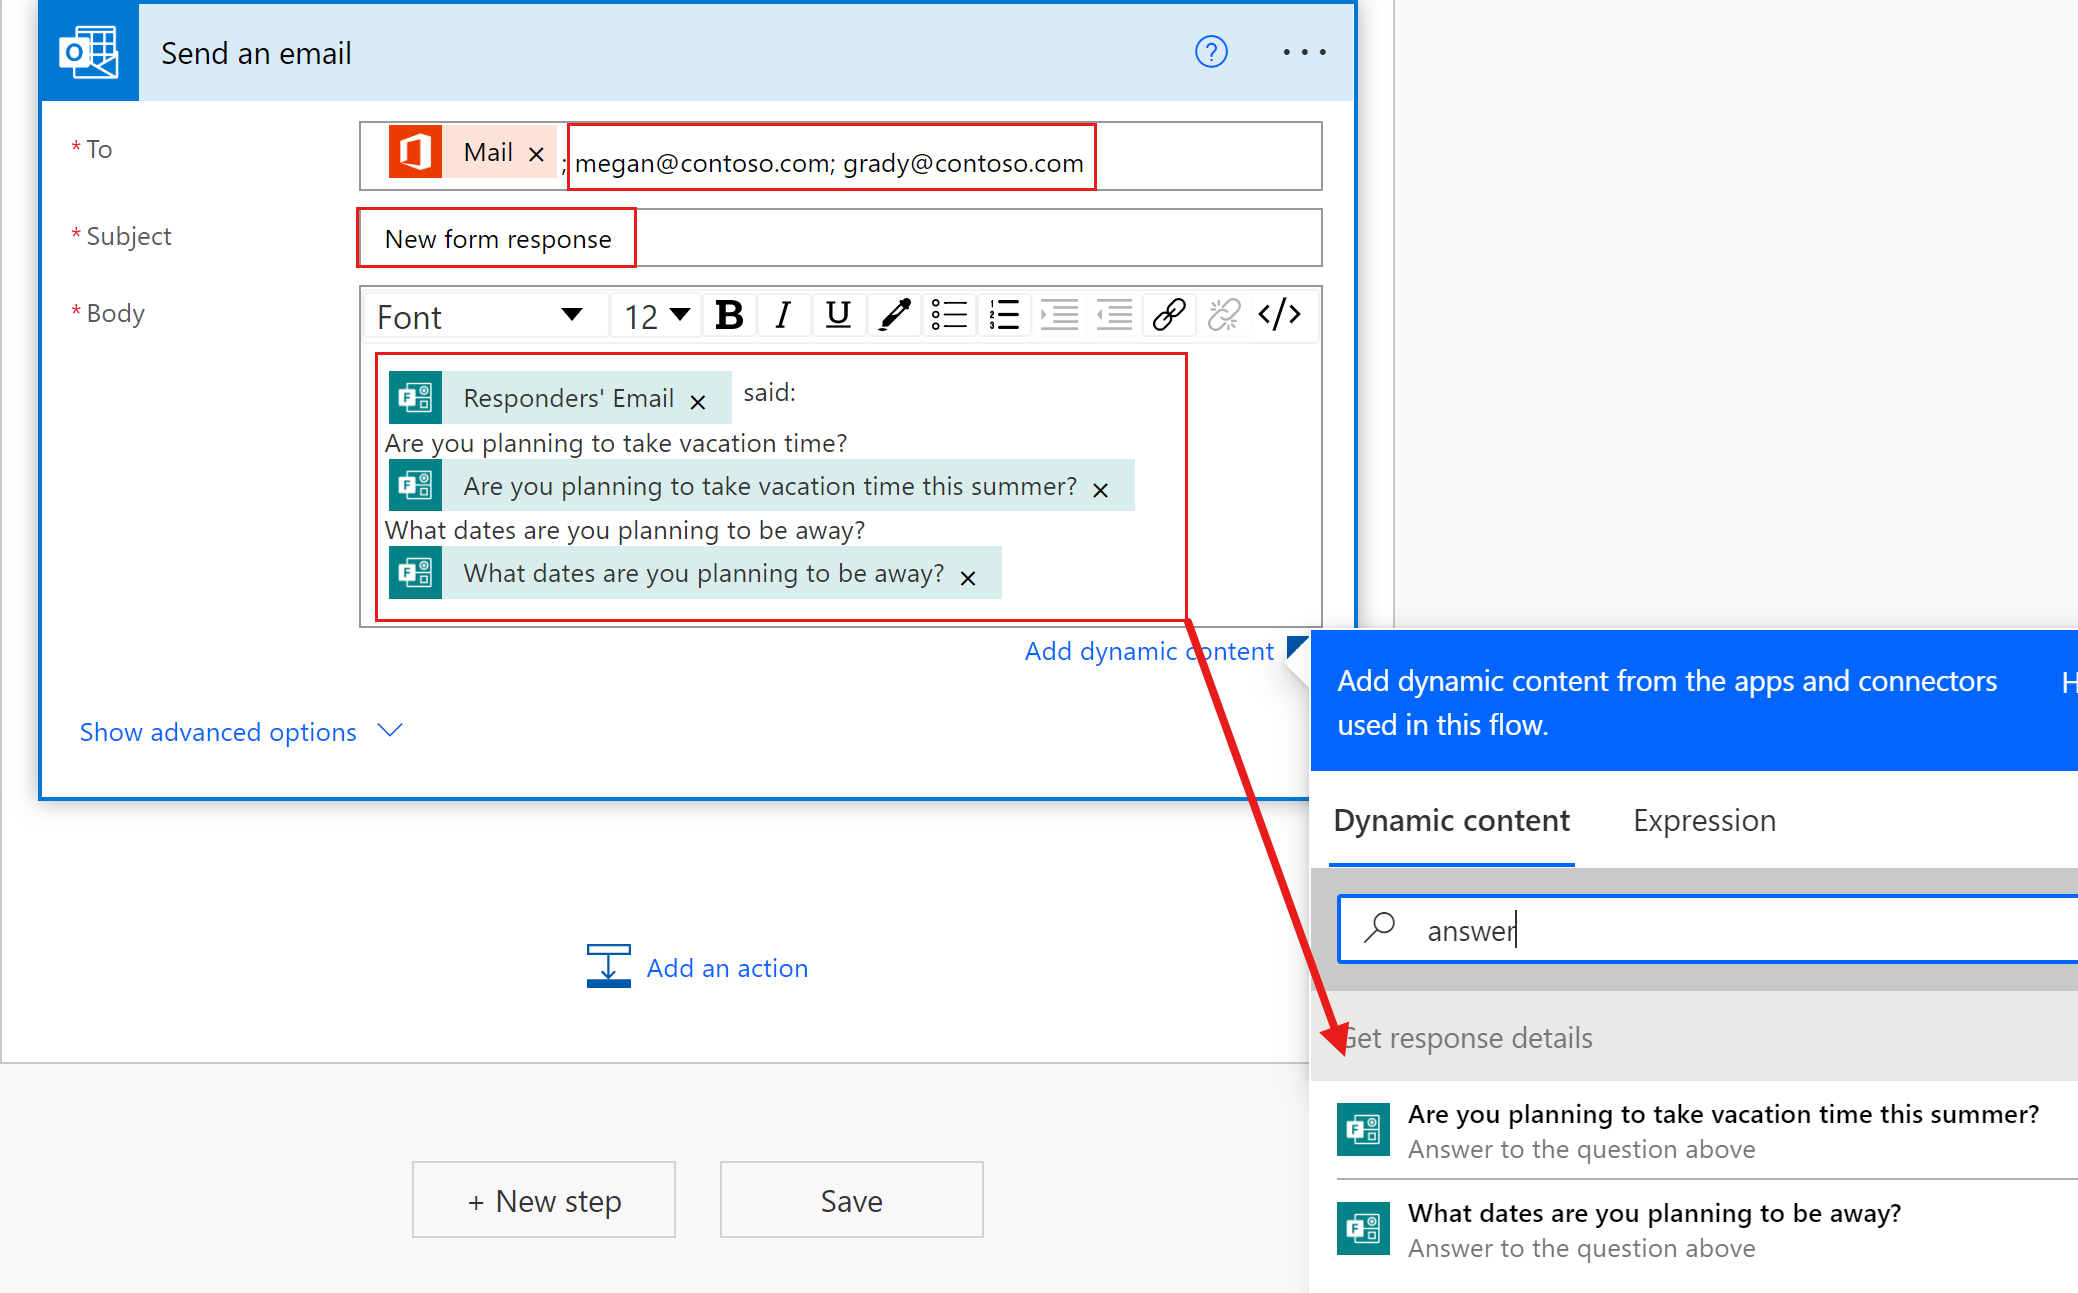 Screenshot of an Outlook send email action in a flow under construction, with custom information highlighted.